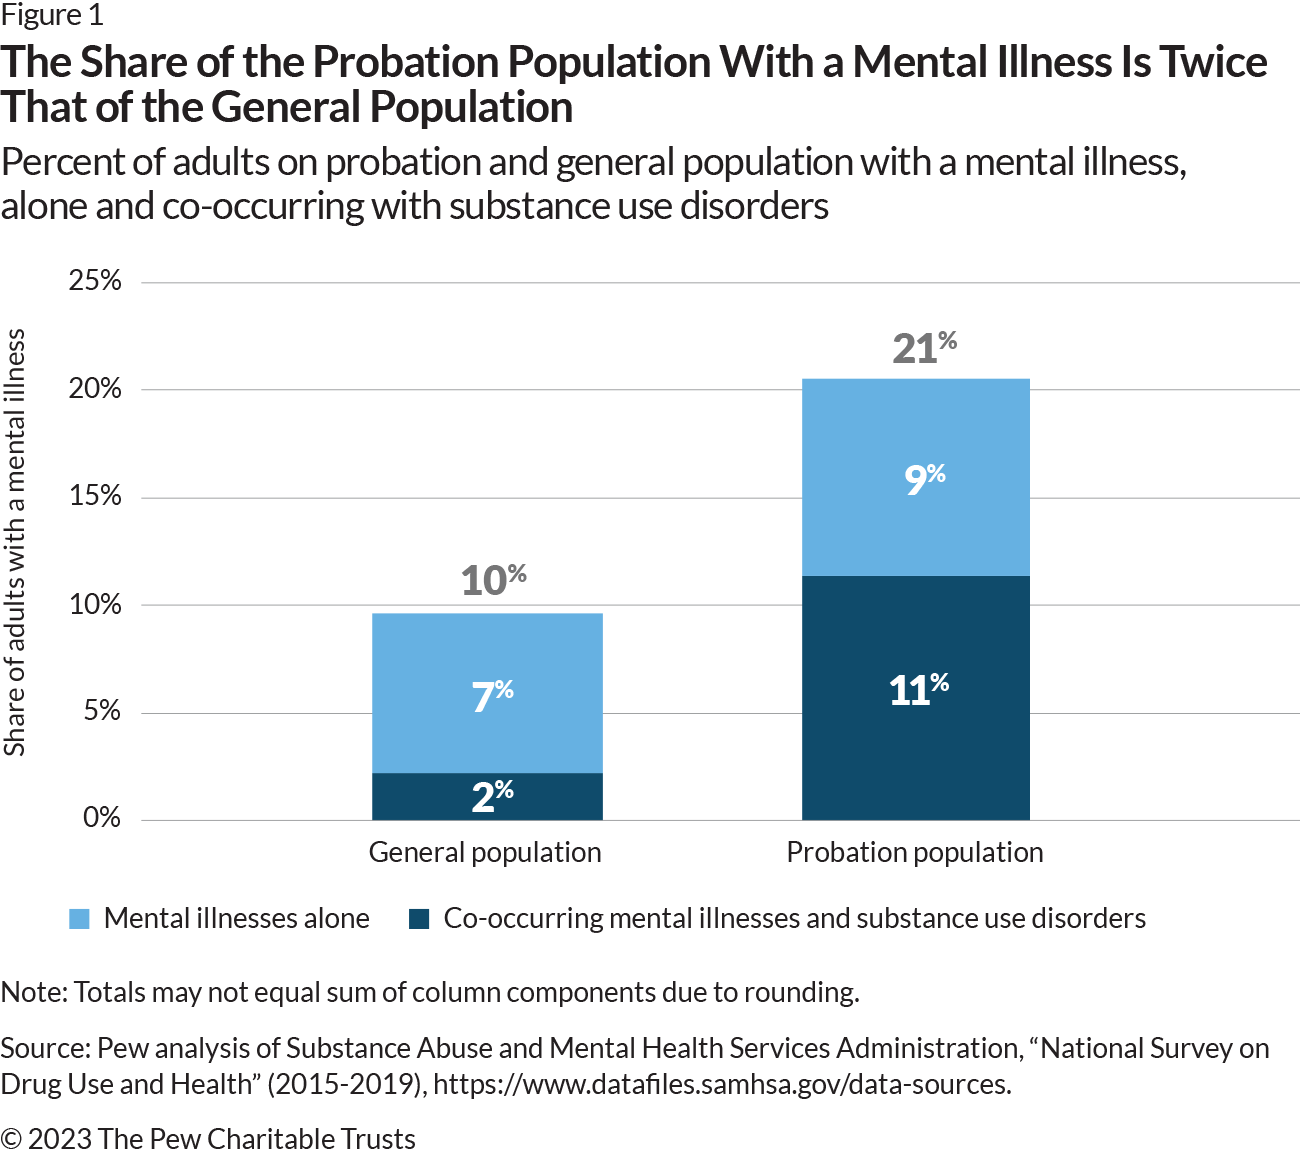 Stacked column chart showing the share of people with a mental illness within the probation population relative to the general population. Among those on probation, 21% of people had a mental illness alone or co-occurring with a substance use disorder. Within this group, 11% had a co-occurring mental illness and substance use disorder, and 9% had a mental illness. Among the general public, 10% of people had a mental illness, alone or co-occurring with a substance use disorder. Within this group, 2% had a co-occurring mental illness and substance use disorder, and 7% had a mental illness. For each bar, the share of those with a mental illness alone is represented in blue, and the share of those with a co-occurring mental illness and substance use disorder is represented in orange.